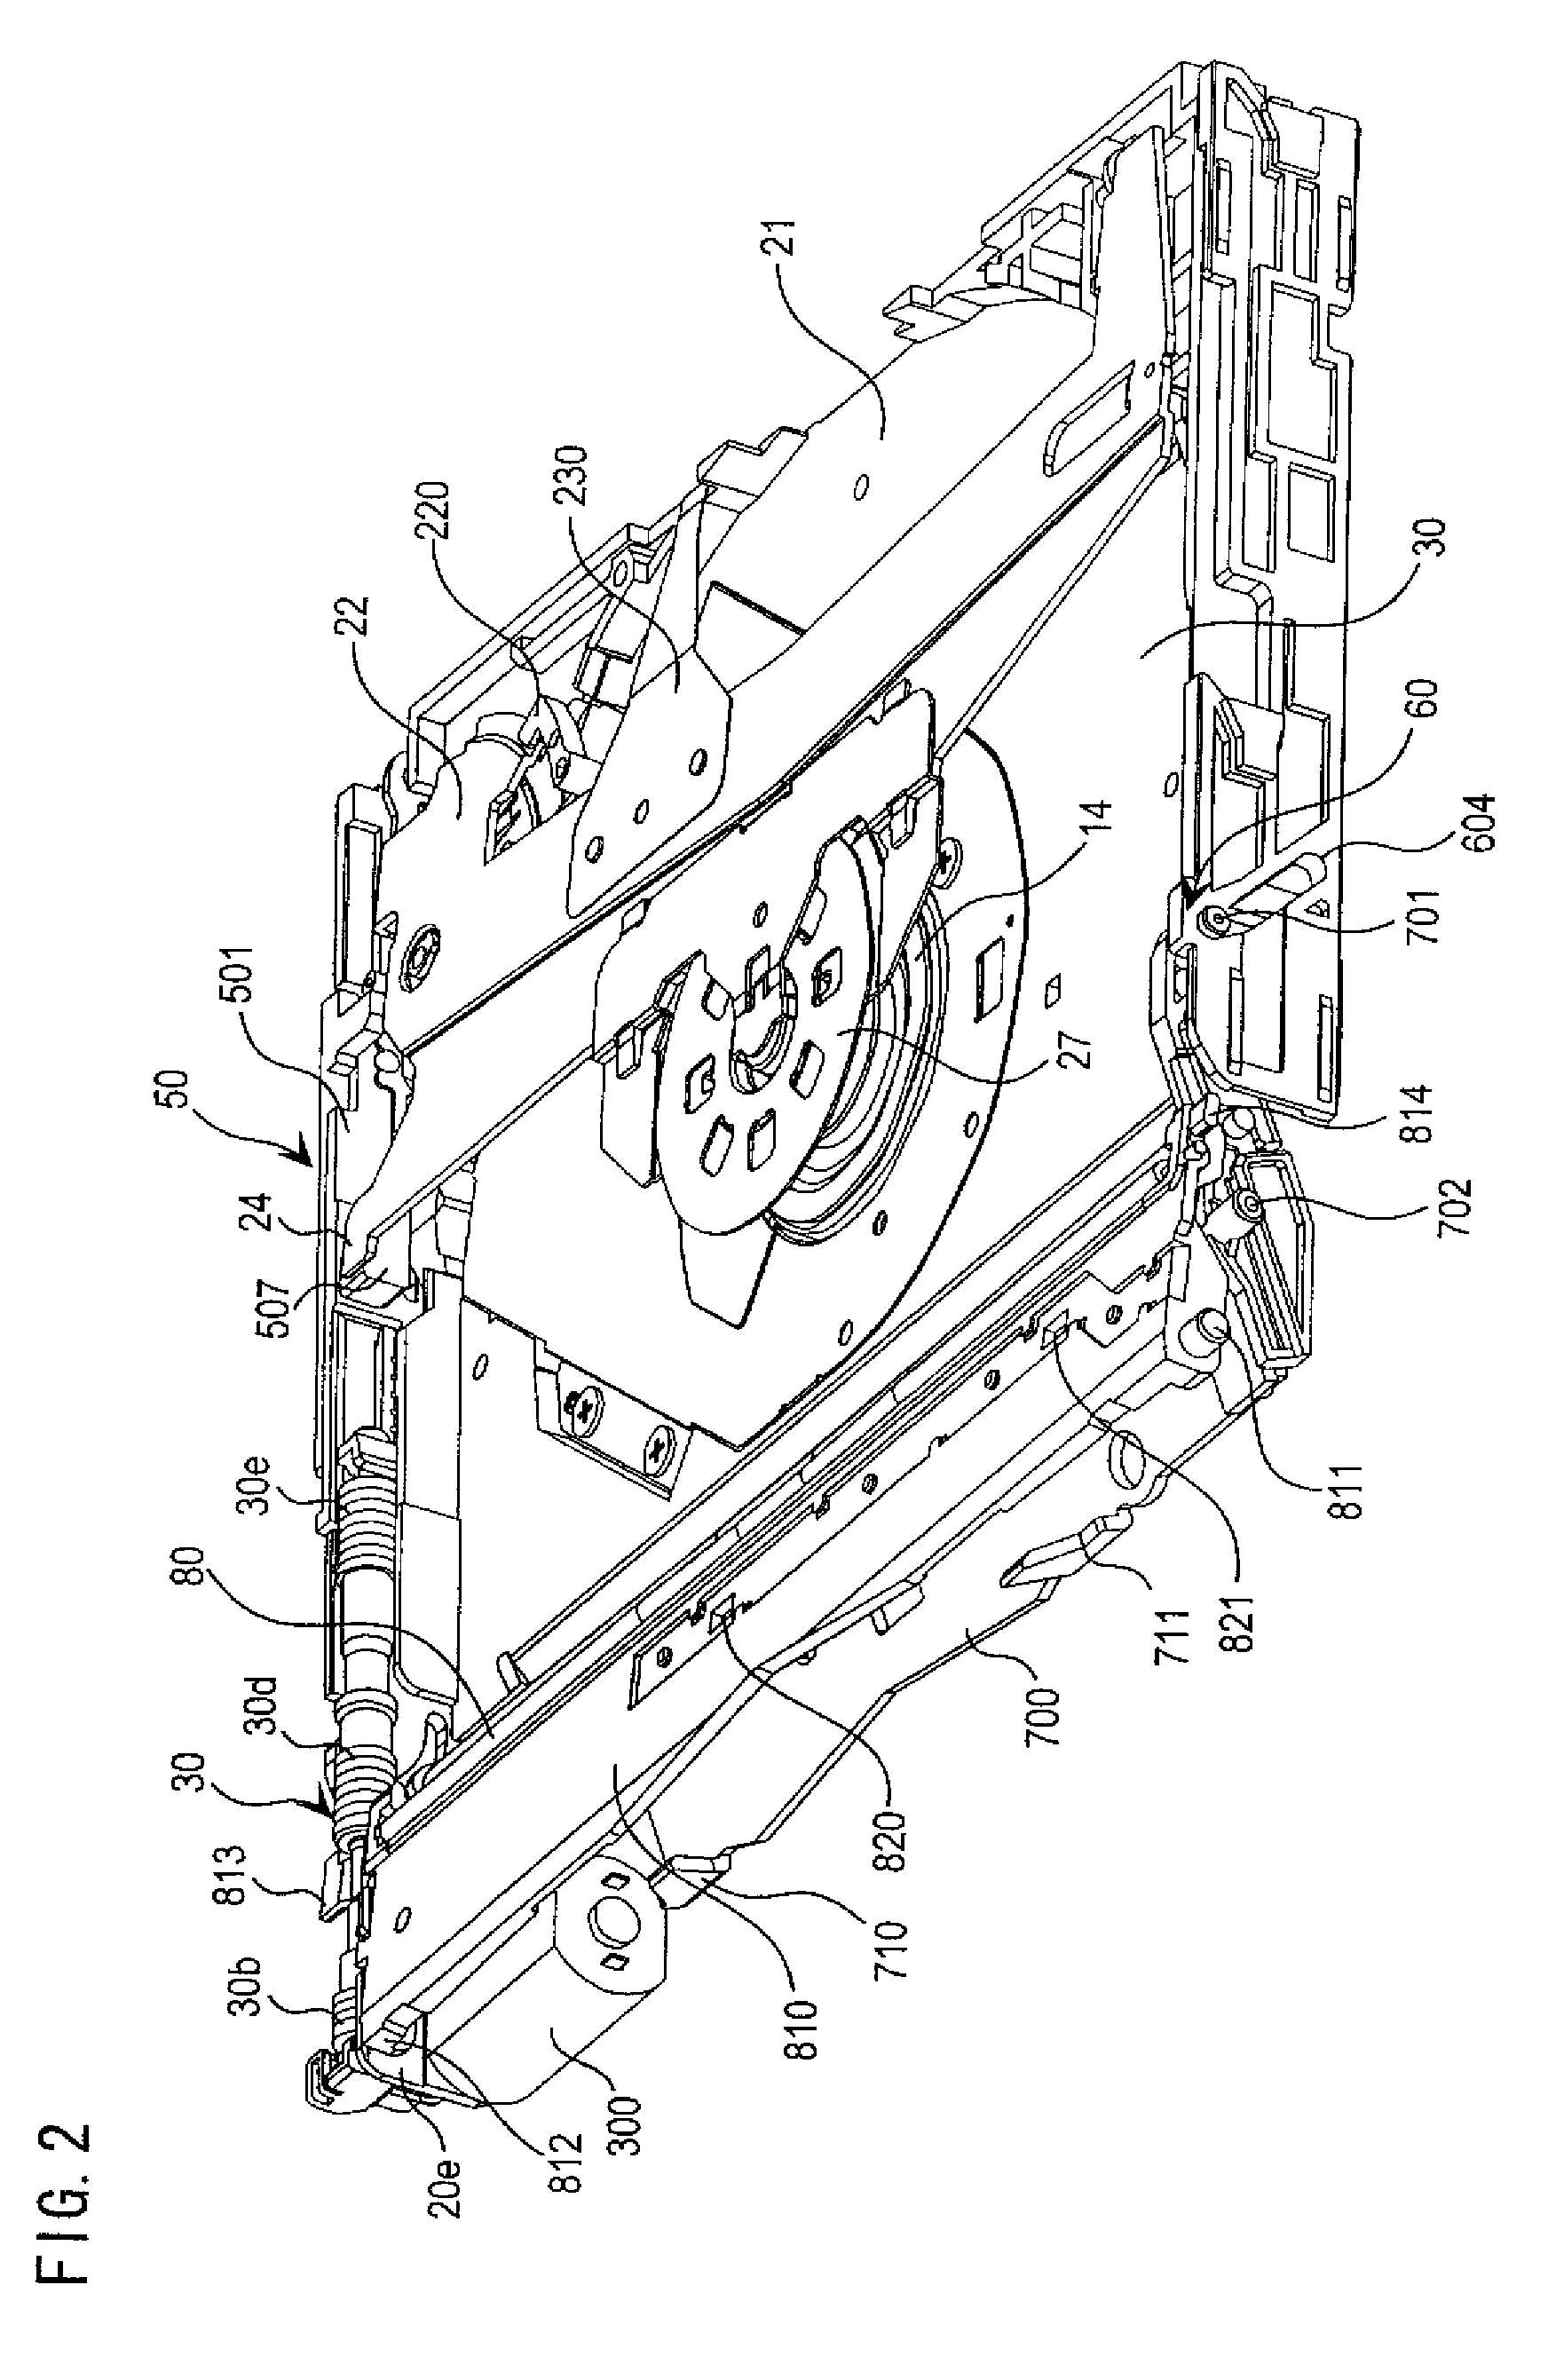 Disc player apparatus with upper and lower rollers for transporting and guiding a disc